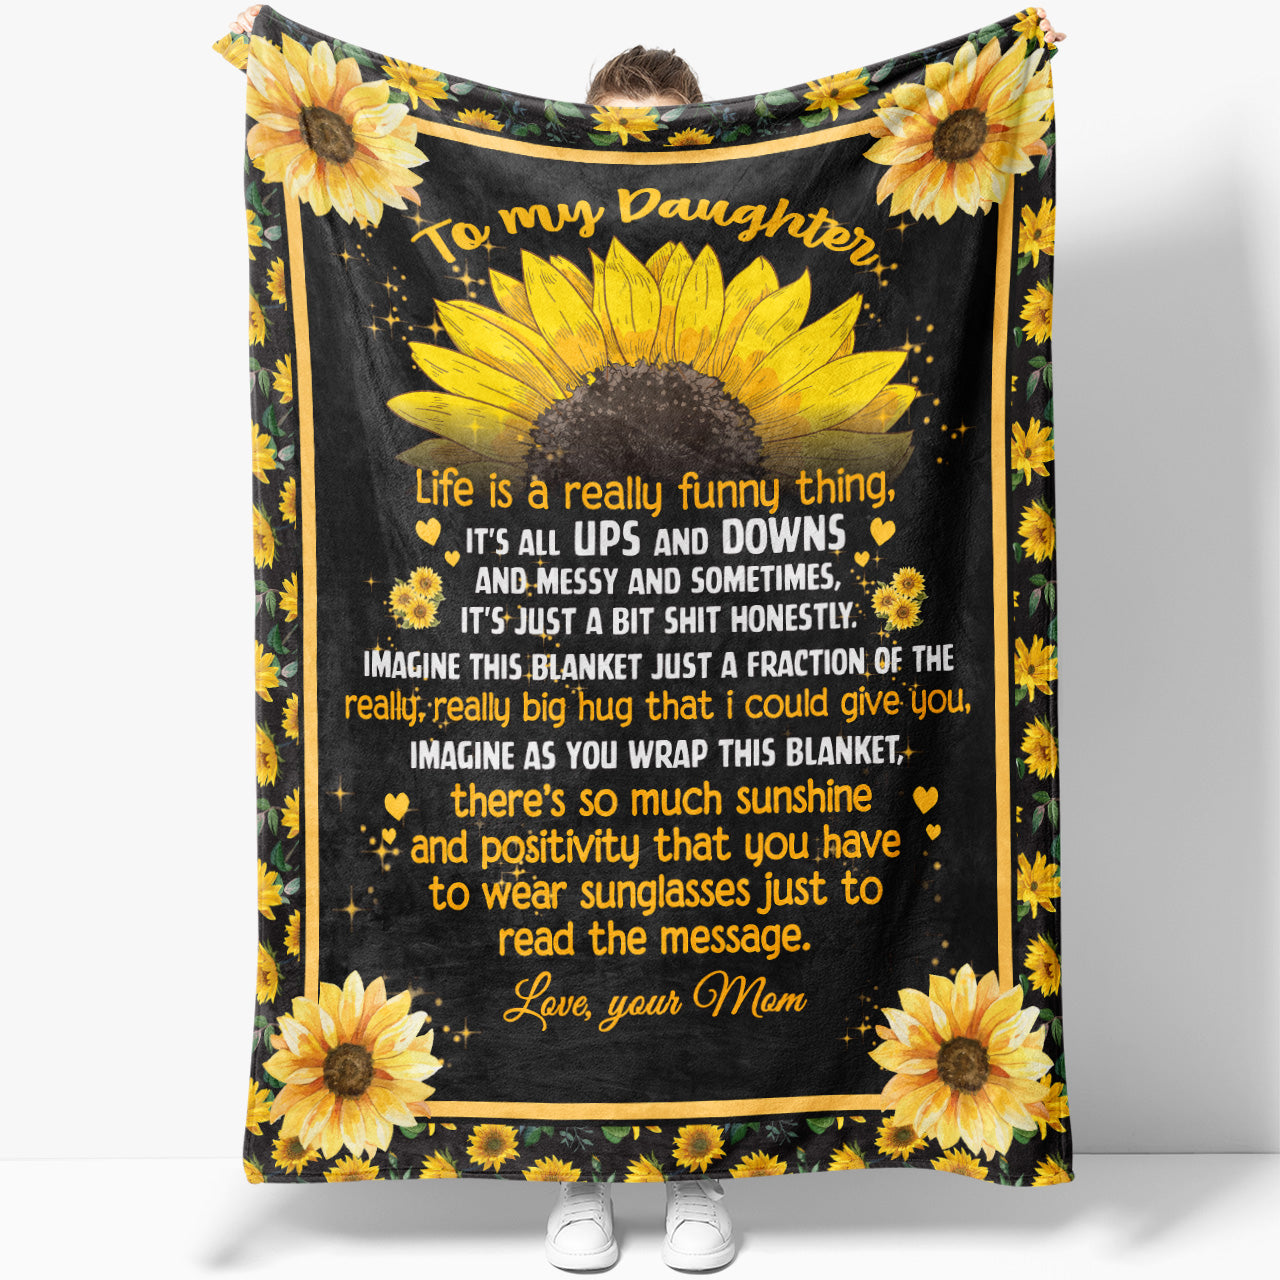 Funny Blanket Gift Ideas To My Daughter, Big Hug That I Could Give You Blanket